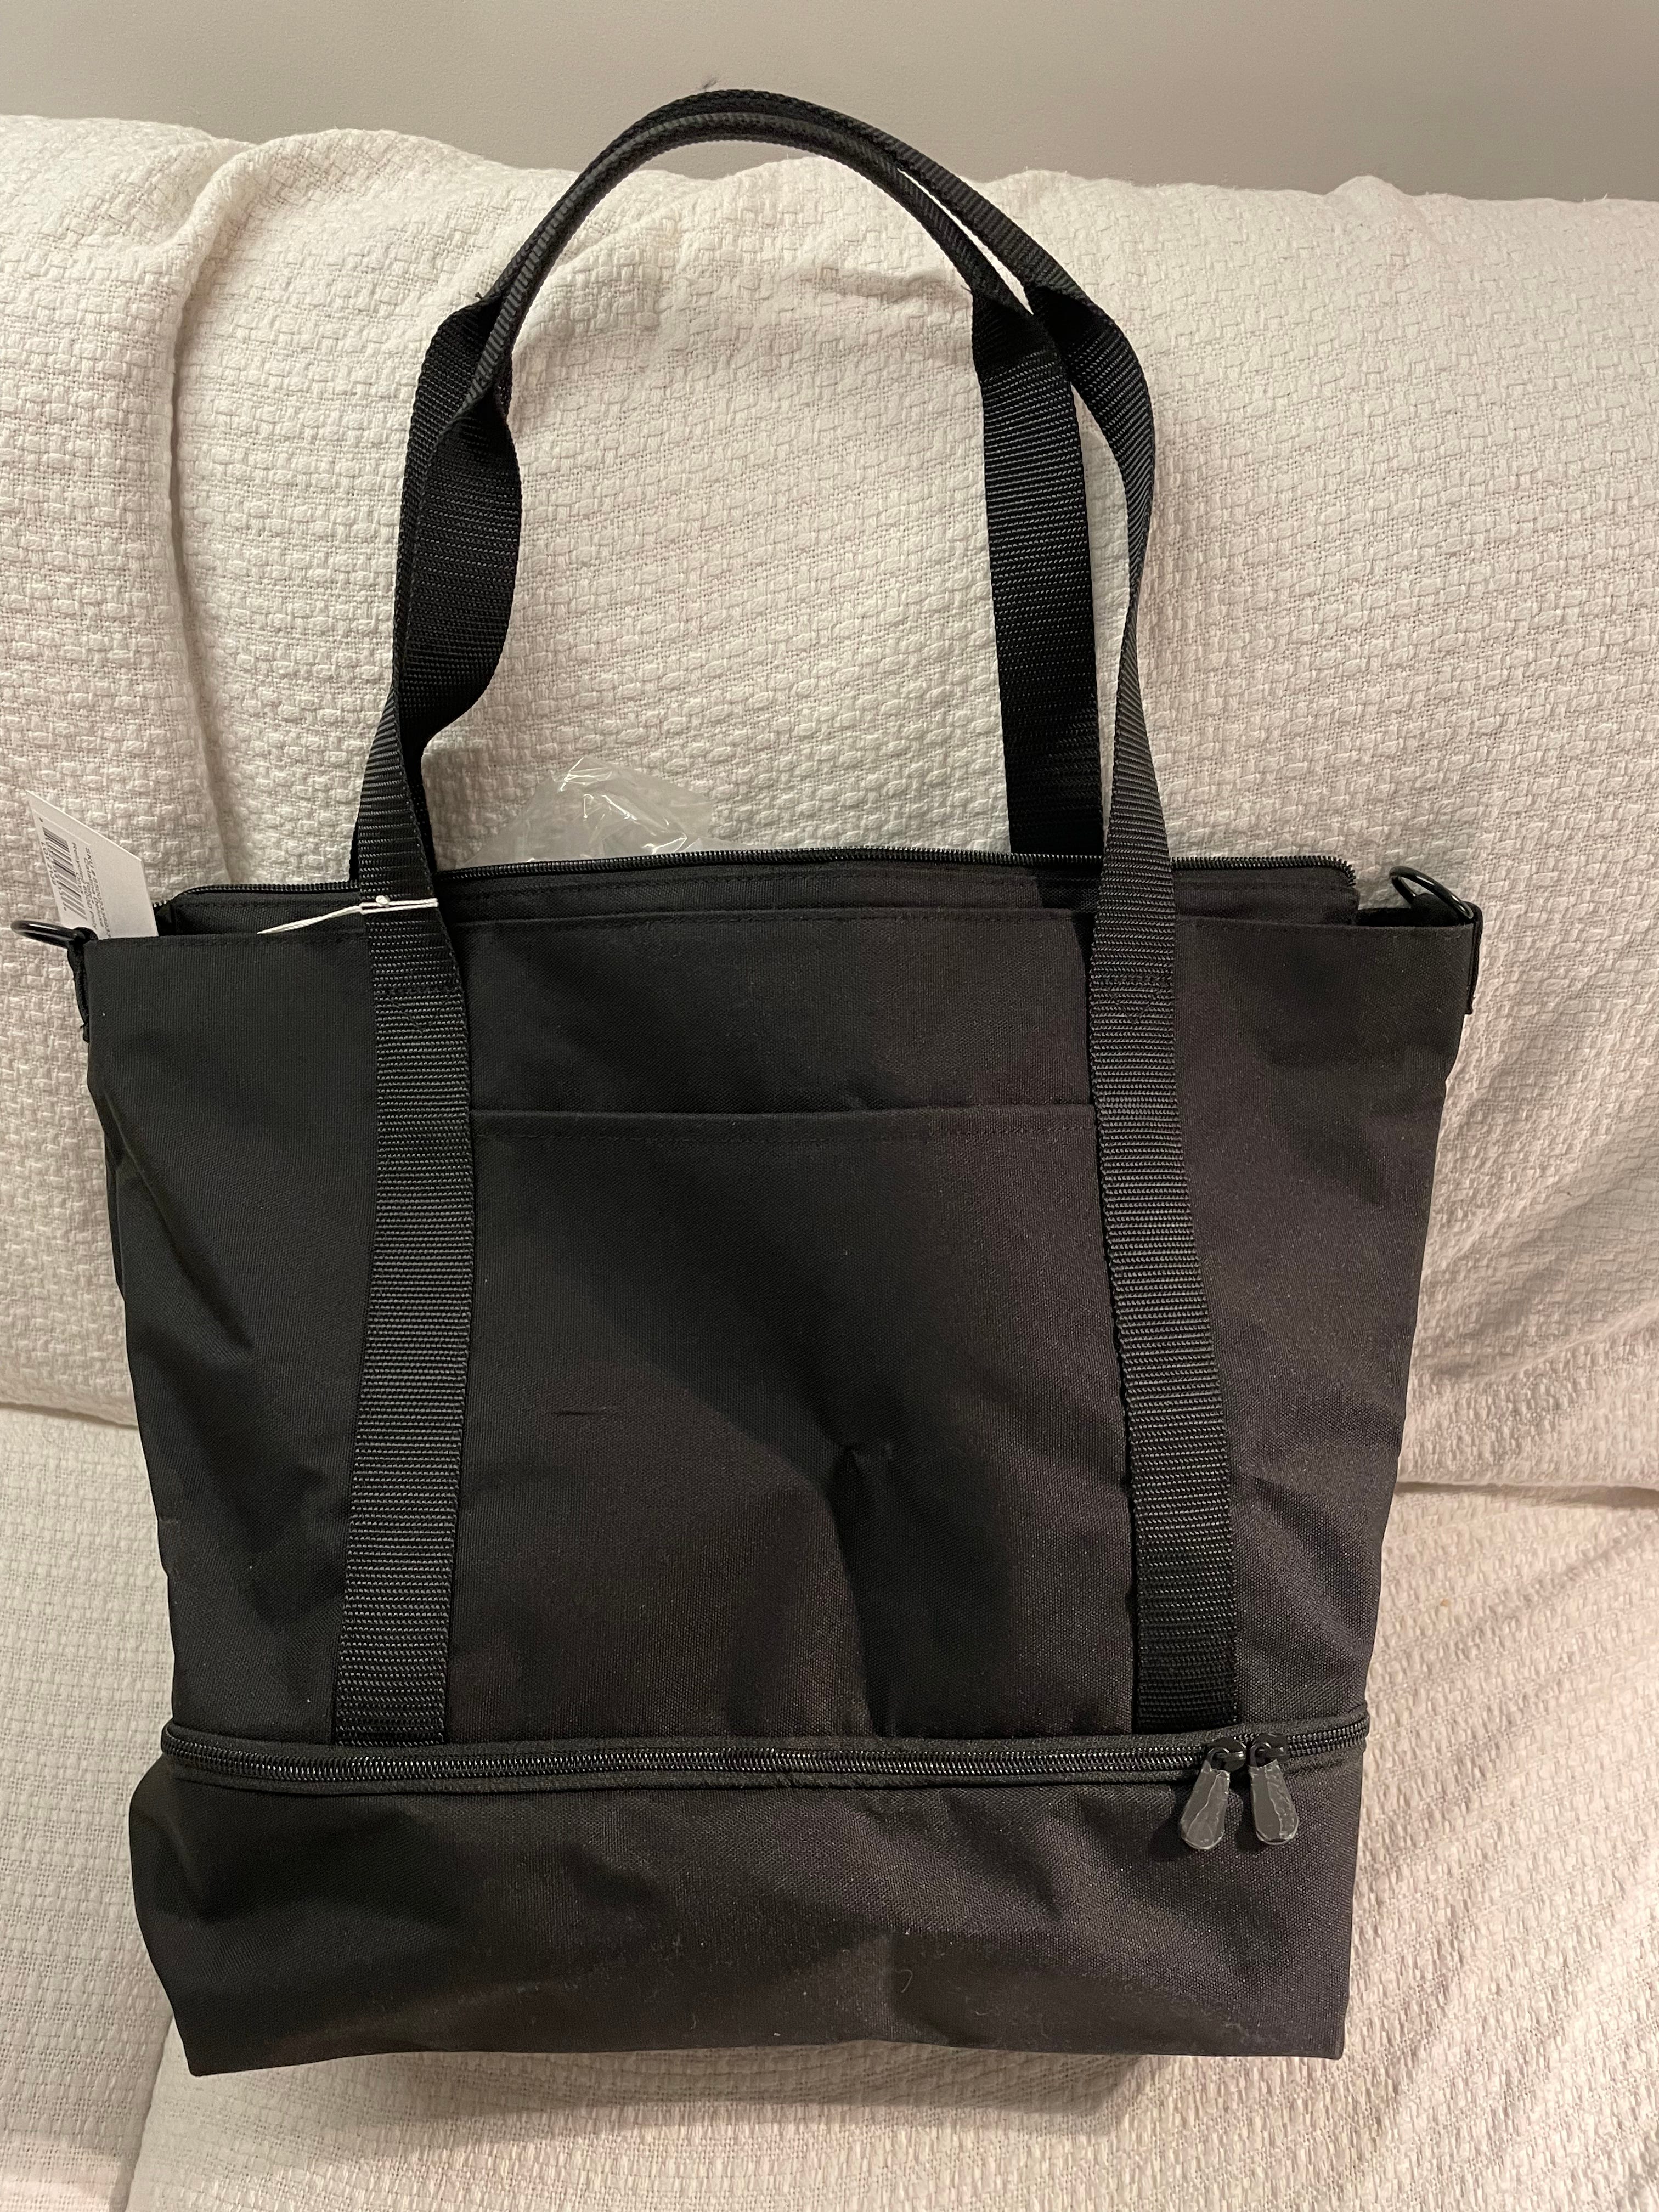 Lo & Sons Catalina Deluxe Tote Review: The Best Organized Travel Bag?